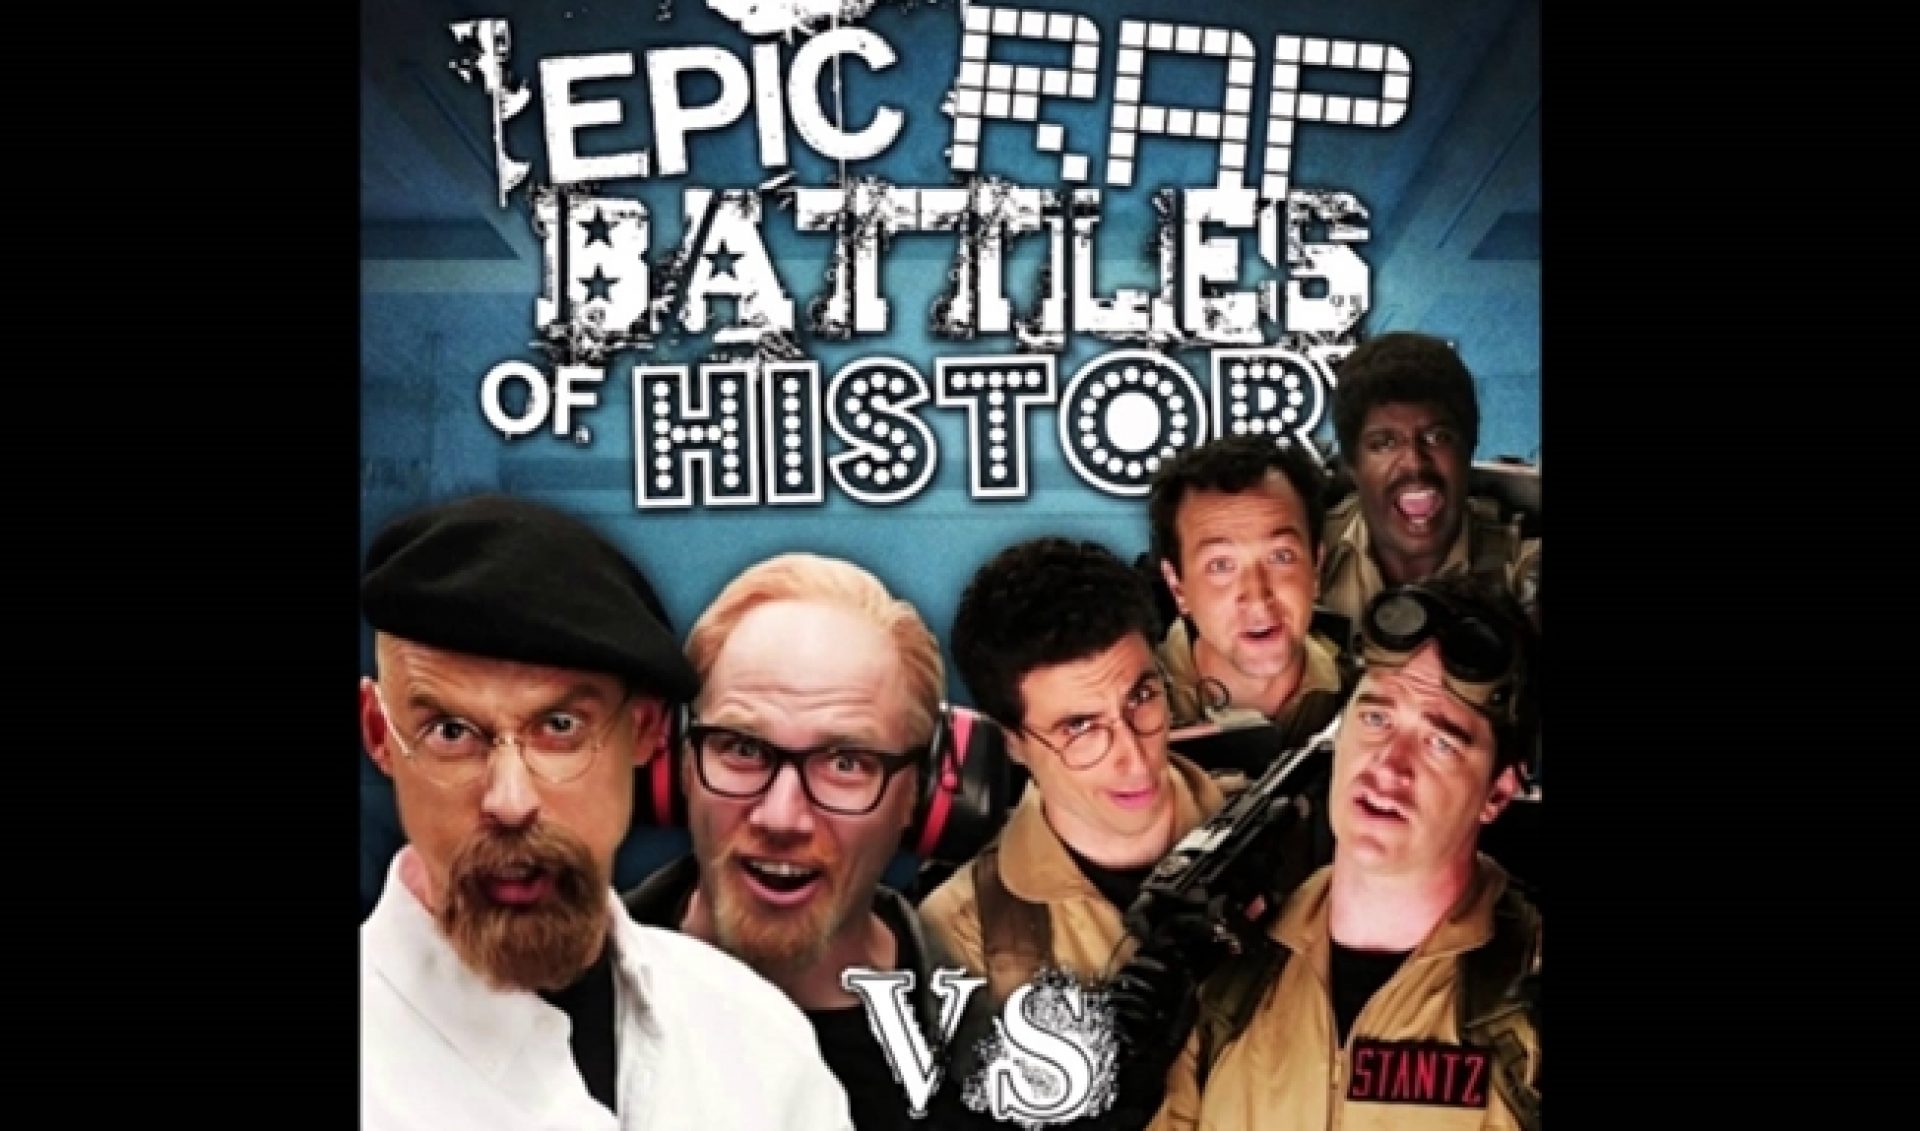 ‘Epic Rap Battles Of History’ Returns With Ghostbusters Vs Mythbusters